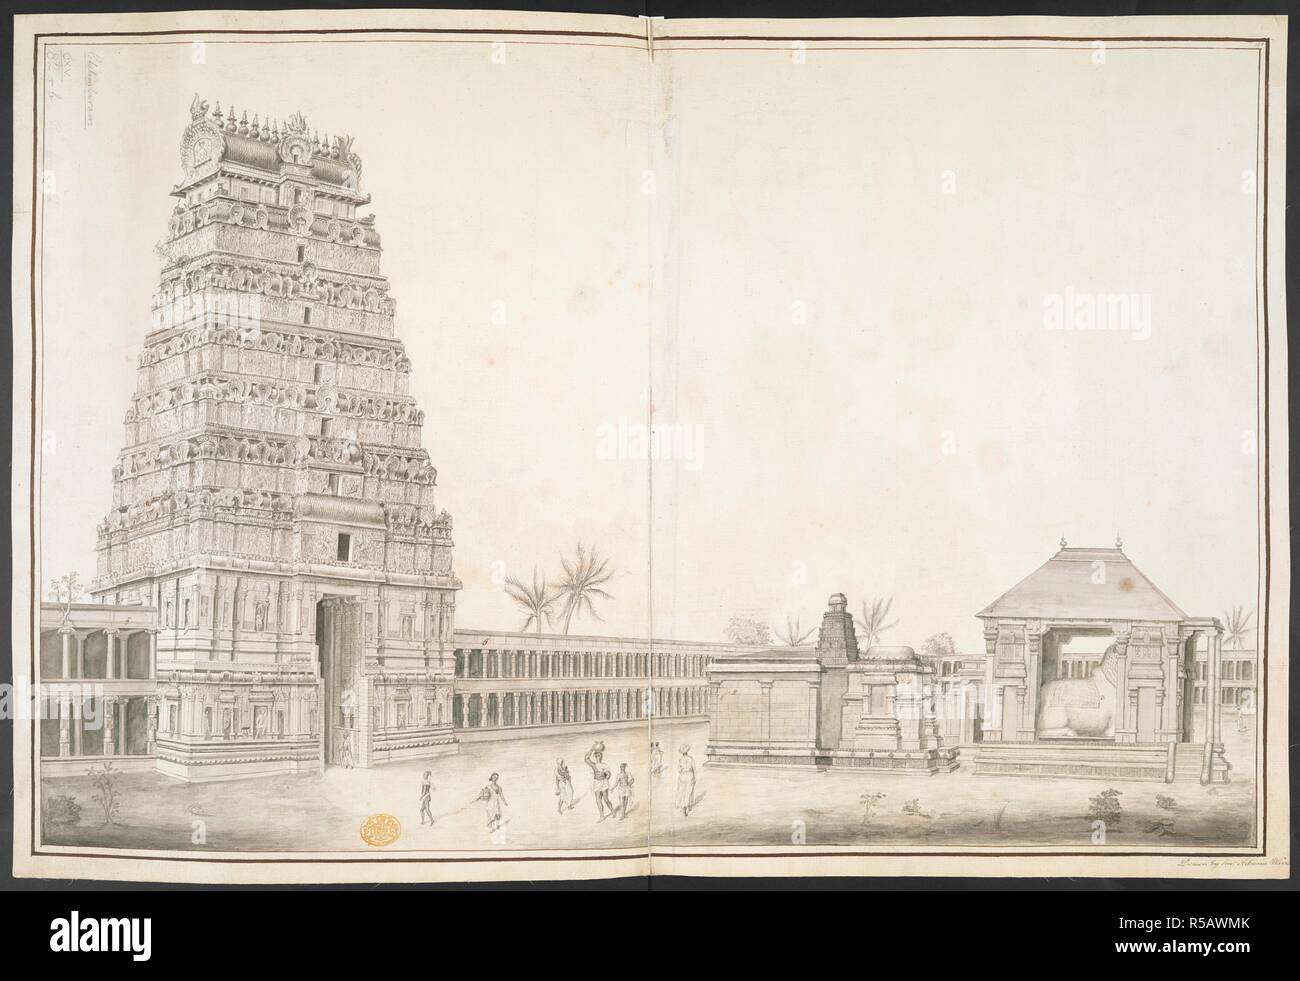 Figures standing in the courtyard; the temple gateway to the left; the Holy house and the holy bull to the right. The Thillai Nataraja Temple. c. 1760-1770. Pen and black ink with monochrome wash over pencil. Source: Maps K.Top.115.82.b.2. Author: Francis Swain Ward. Stock Photo